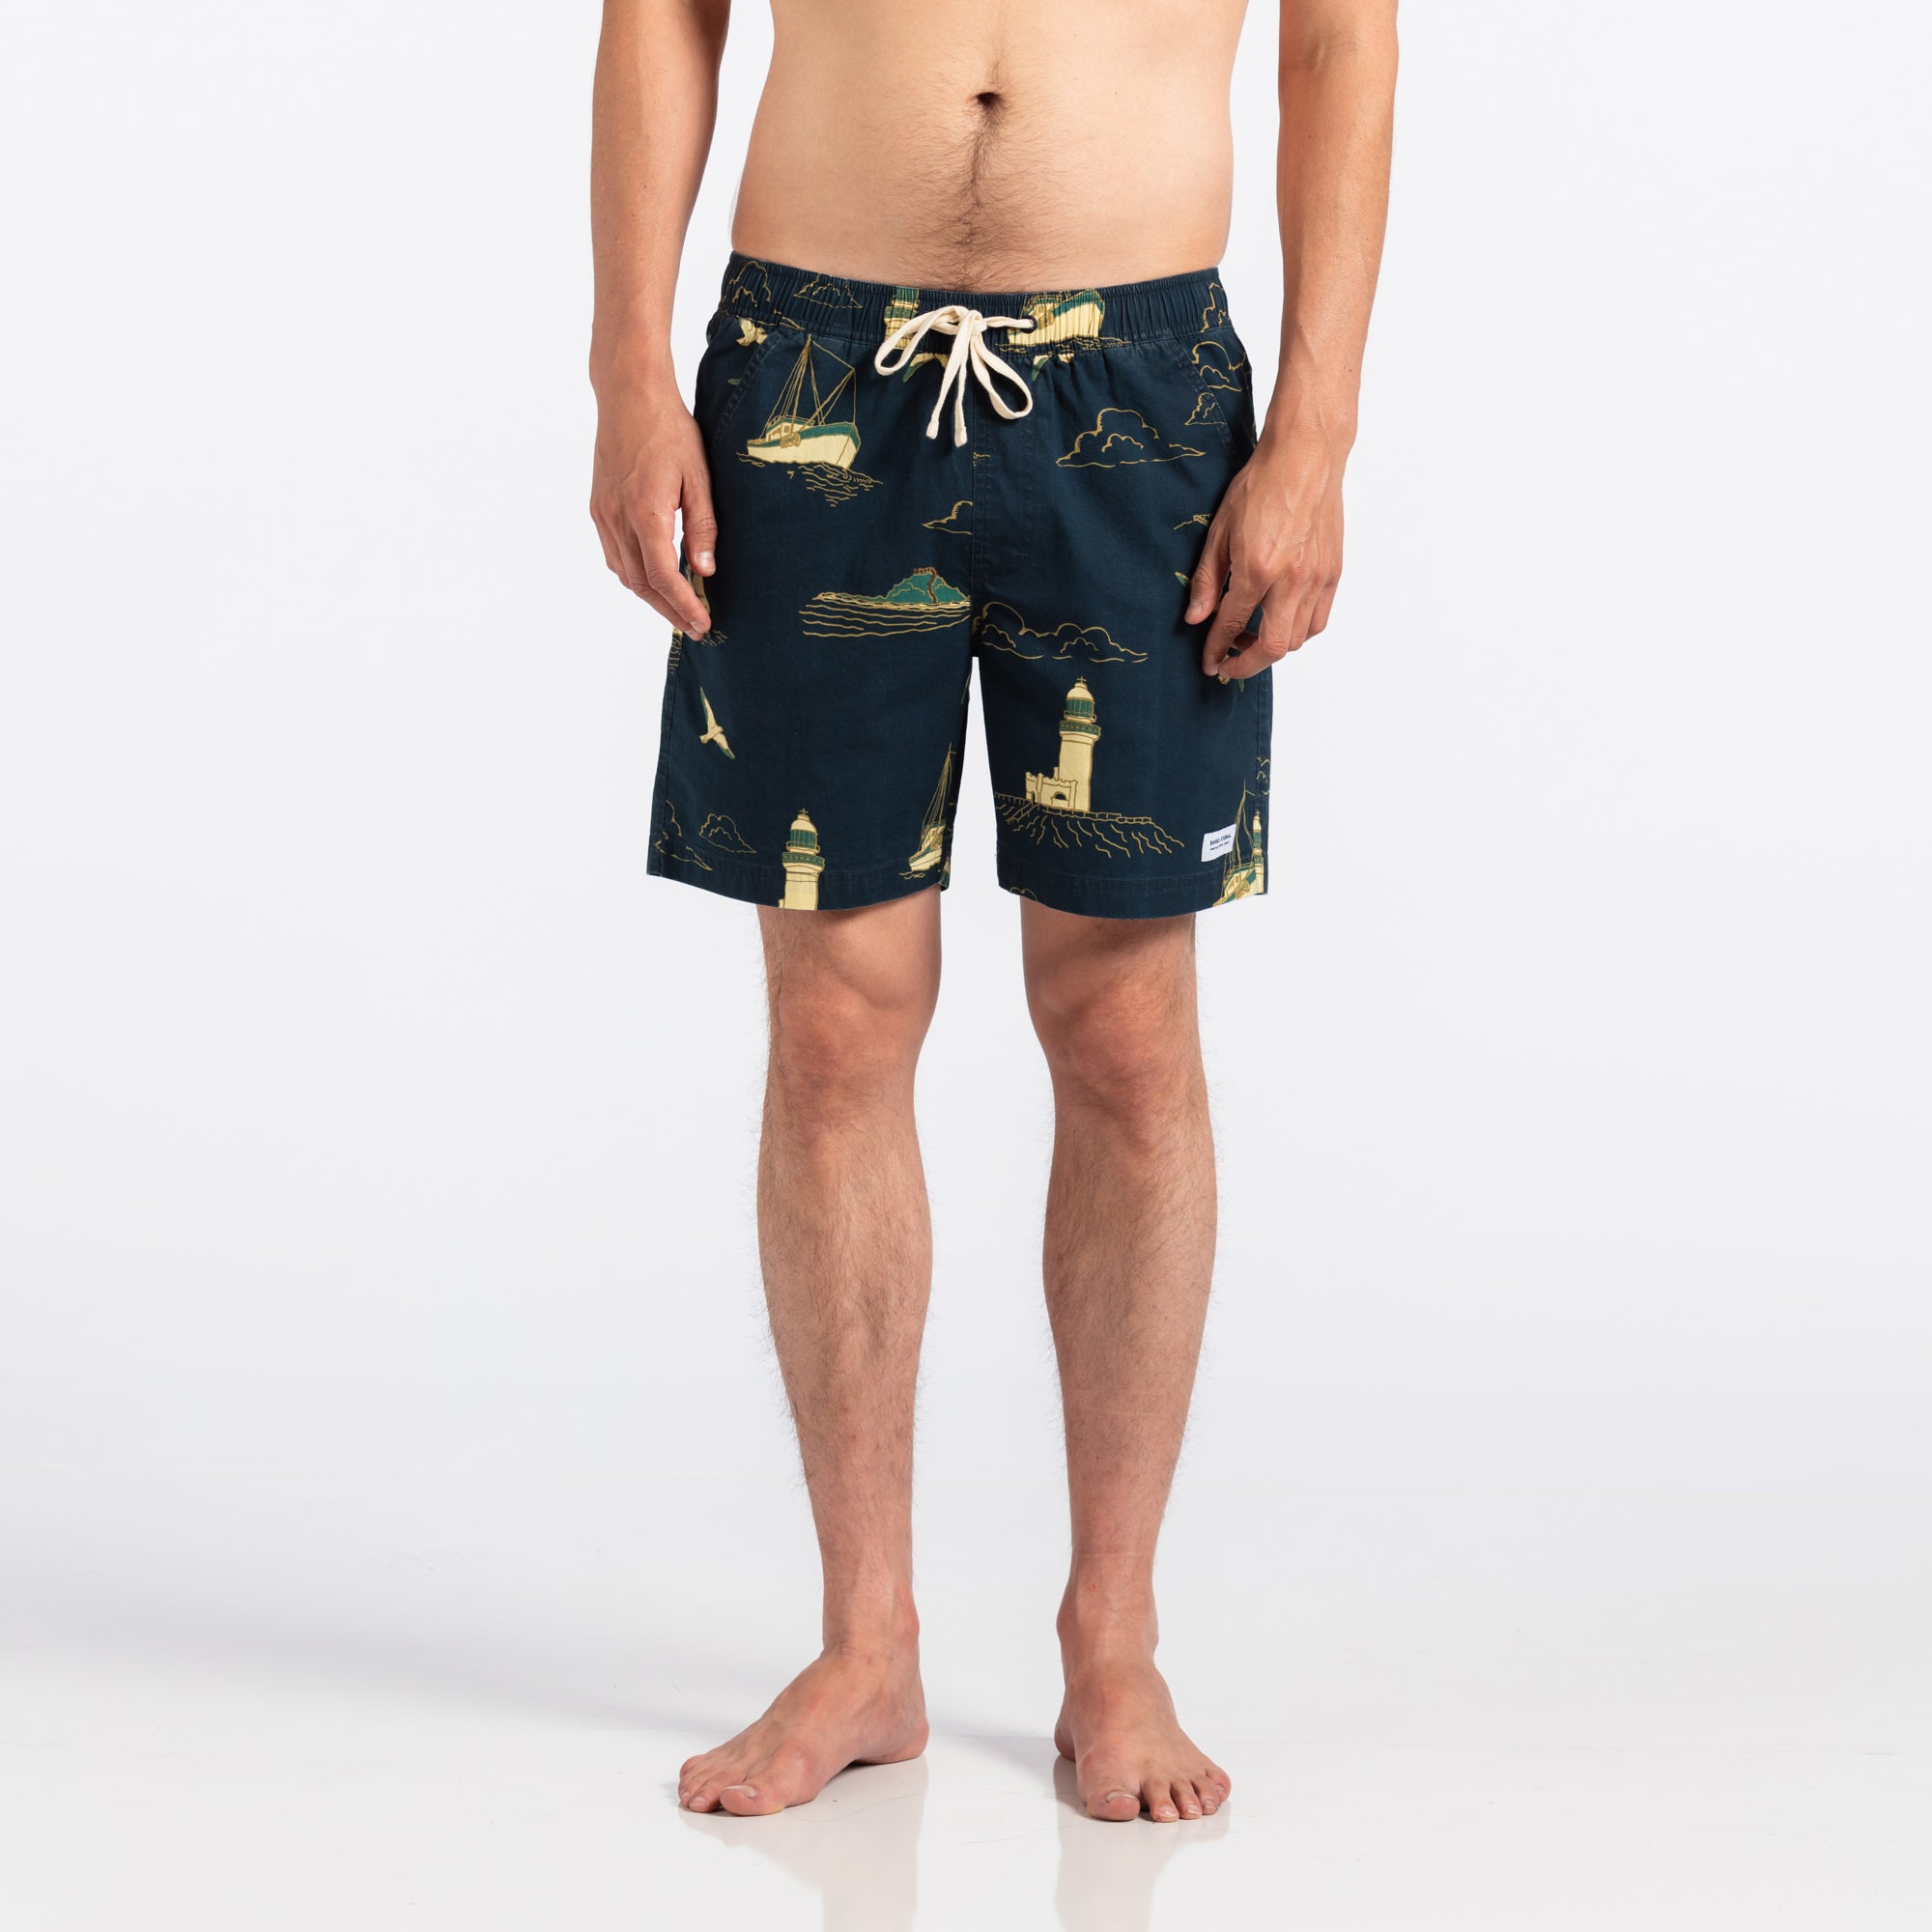 Boardshorts Sublimated print and colorful